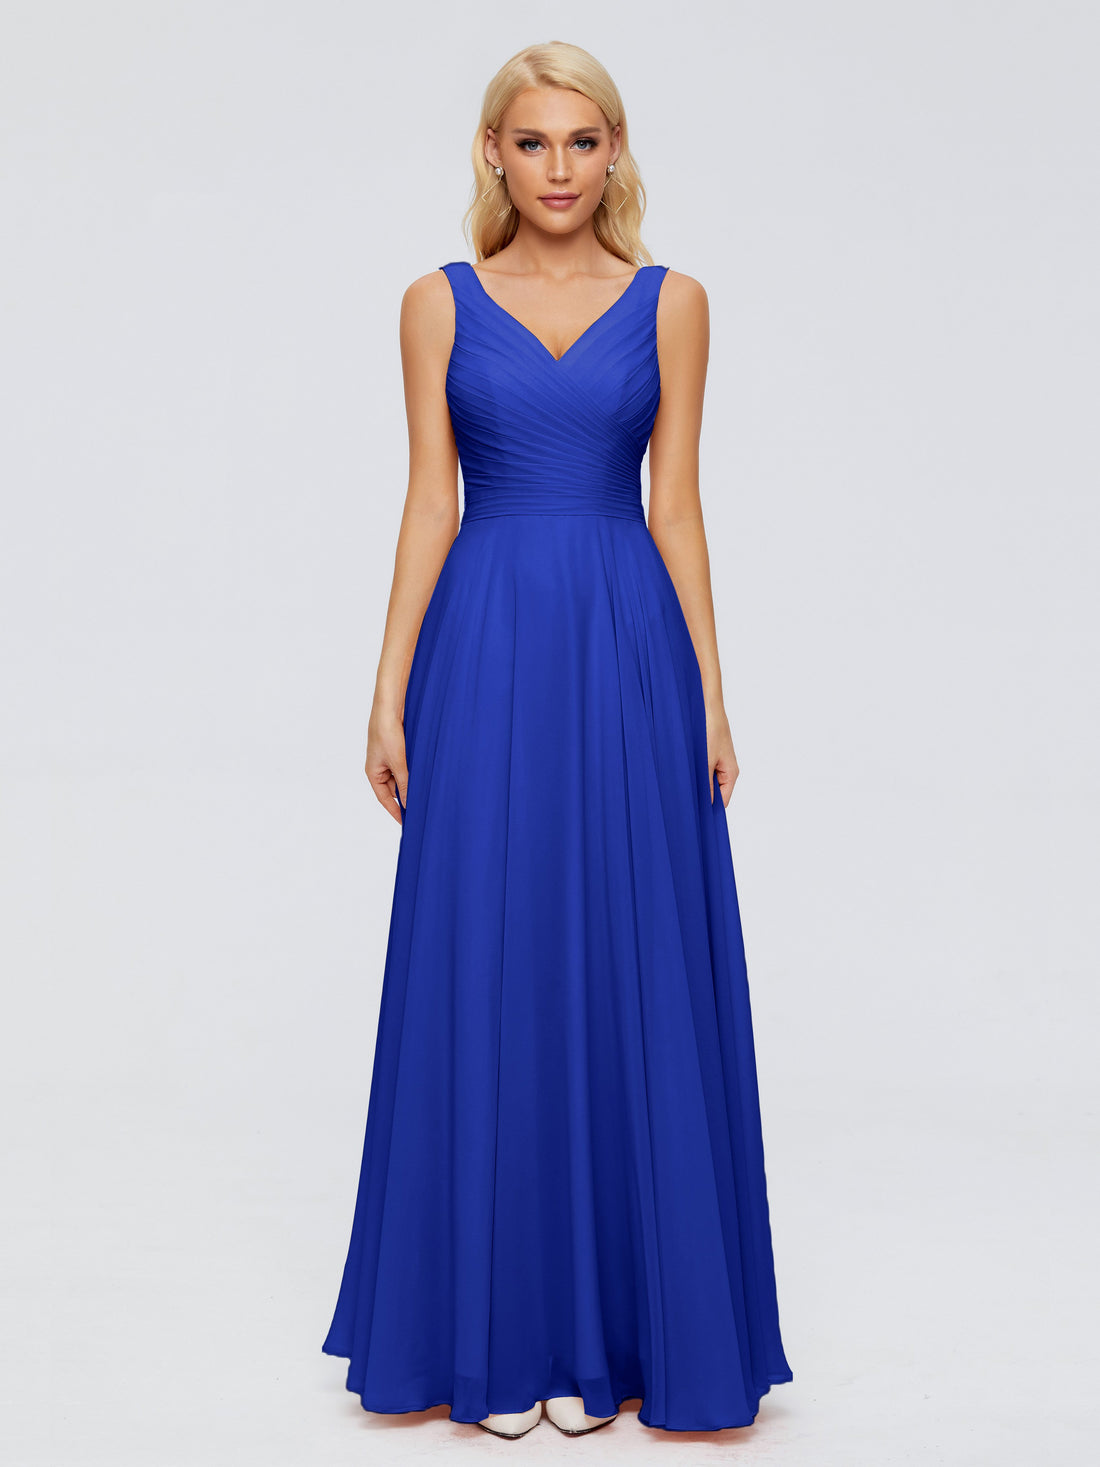 10 Elegant Royal Blue Bridesmaid Dresses Ideas in Every Style